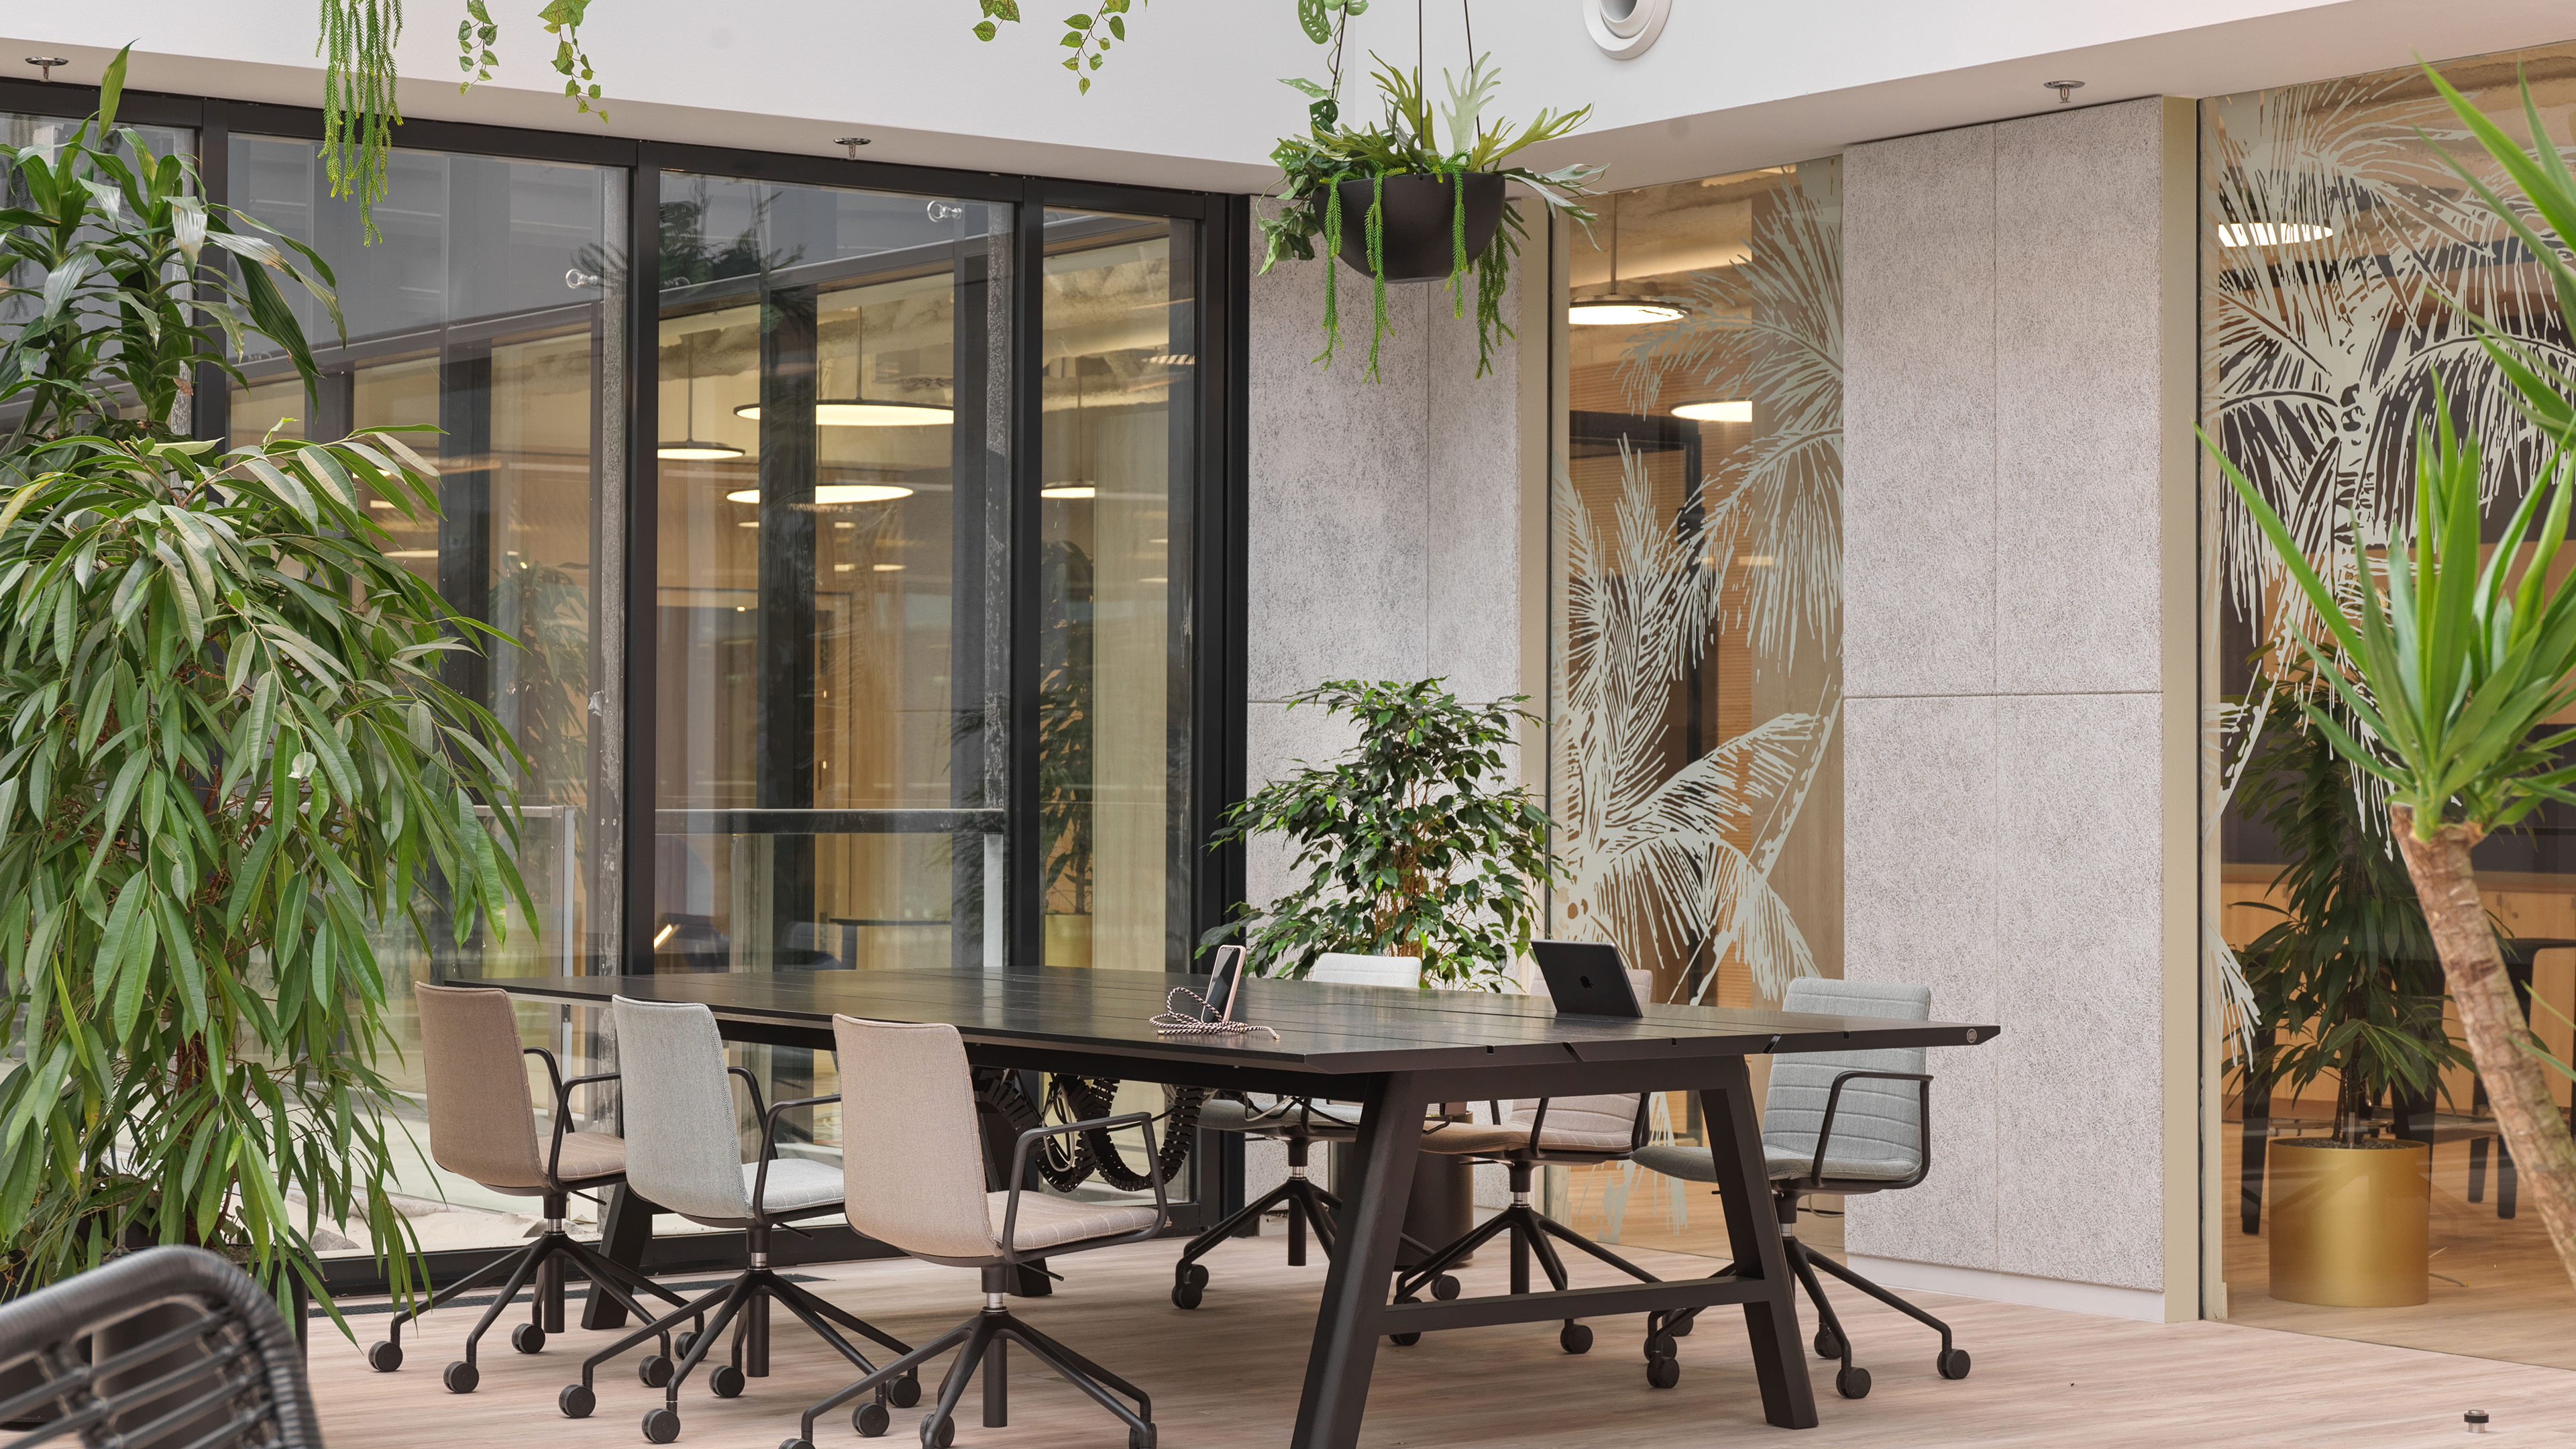 HiSolutions. Sustainable workspace for pioneers